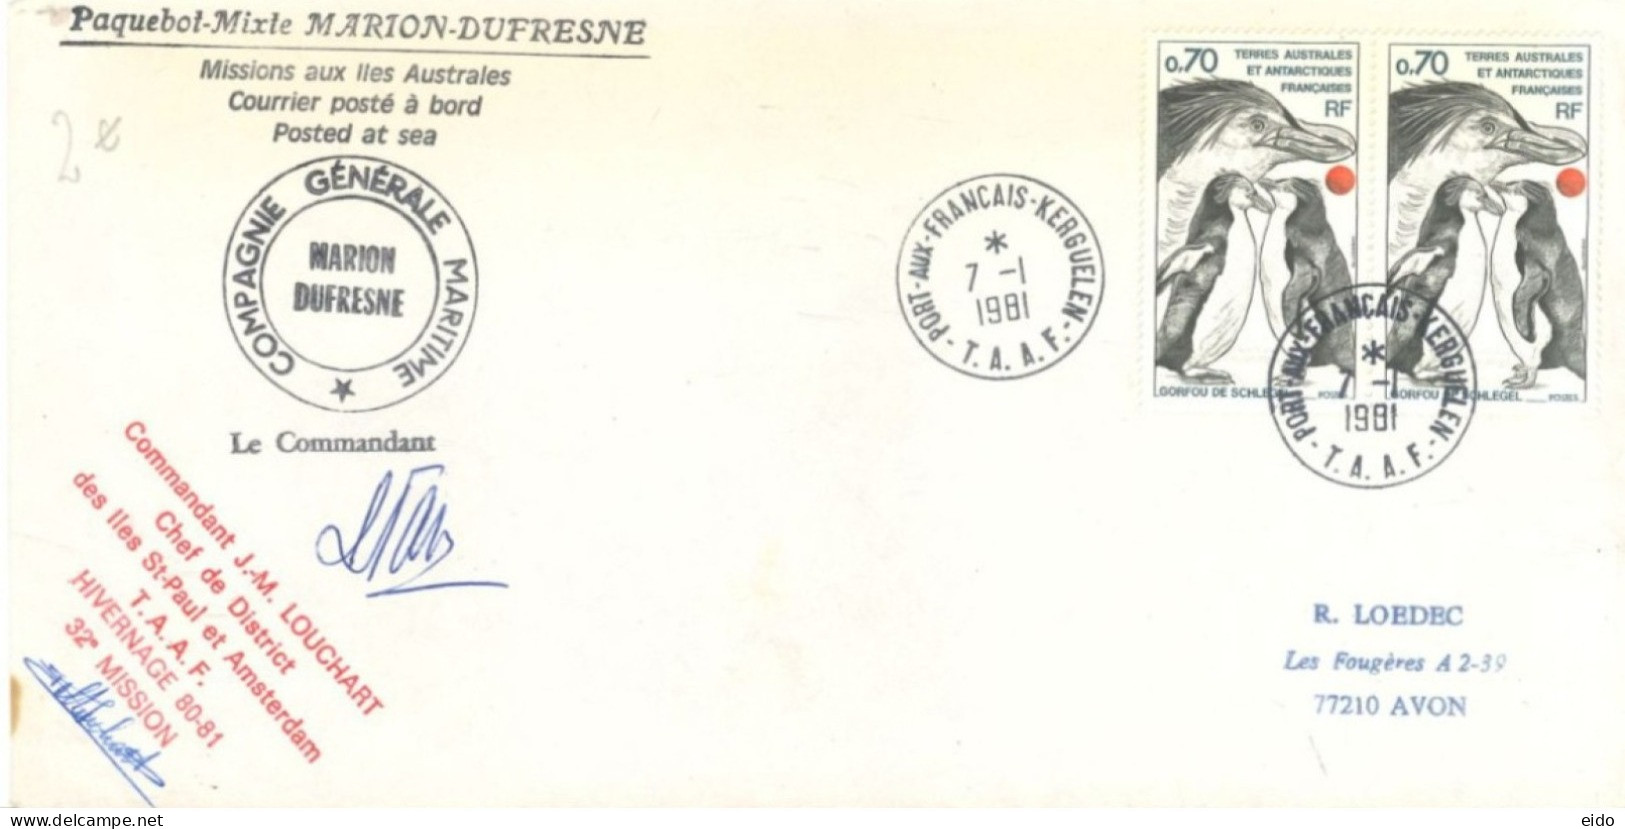 AUSTRALIAN ANTARCTIC TERRITORY - 1981, POSTED AT SEA SPECIAL COVER SIGNED BY COMMANDER J.M. LOUCHART SENT TO AVON FRANCE - Briefe U. Dokumente